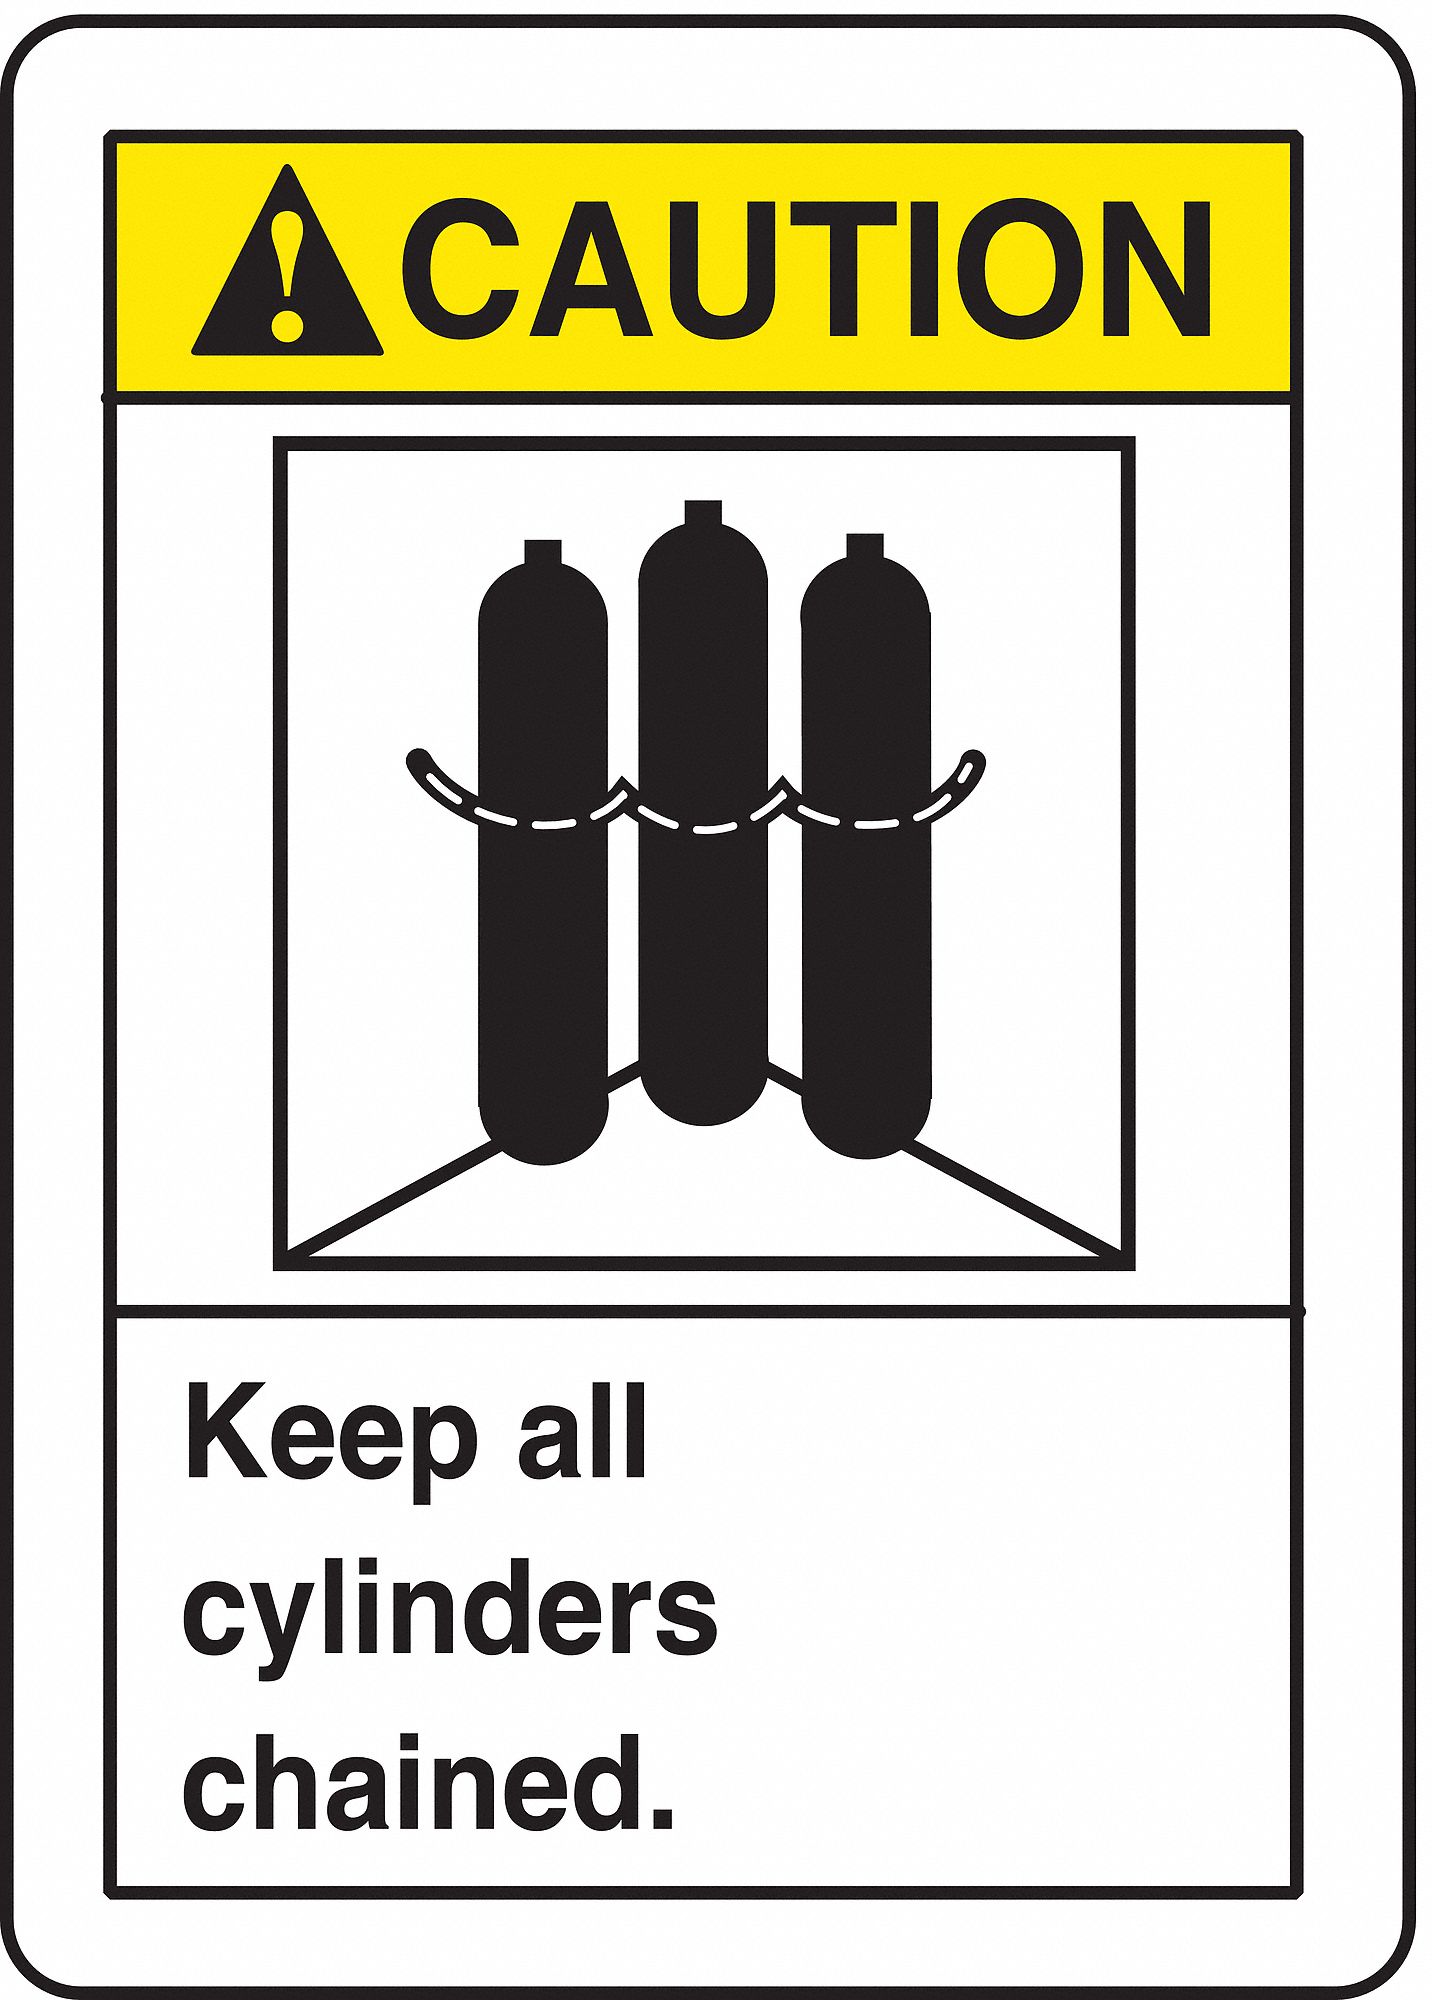 Caution Sign,10 x 7In,YEL and BK/WHT,AL